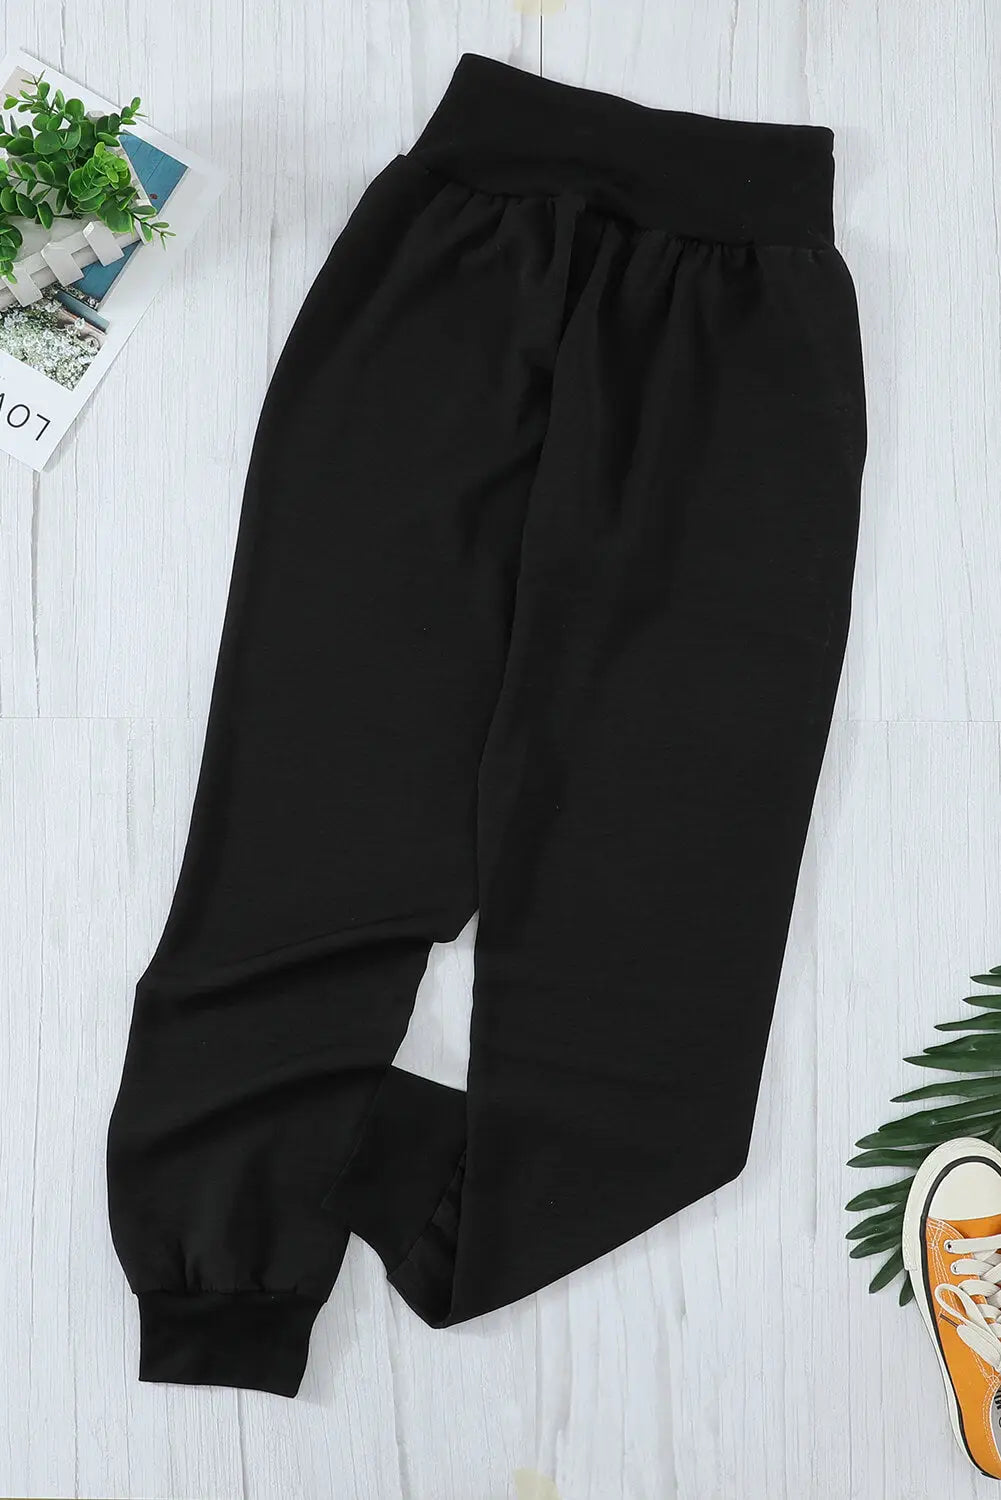 Black pocketed casual joggers